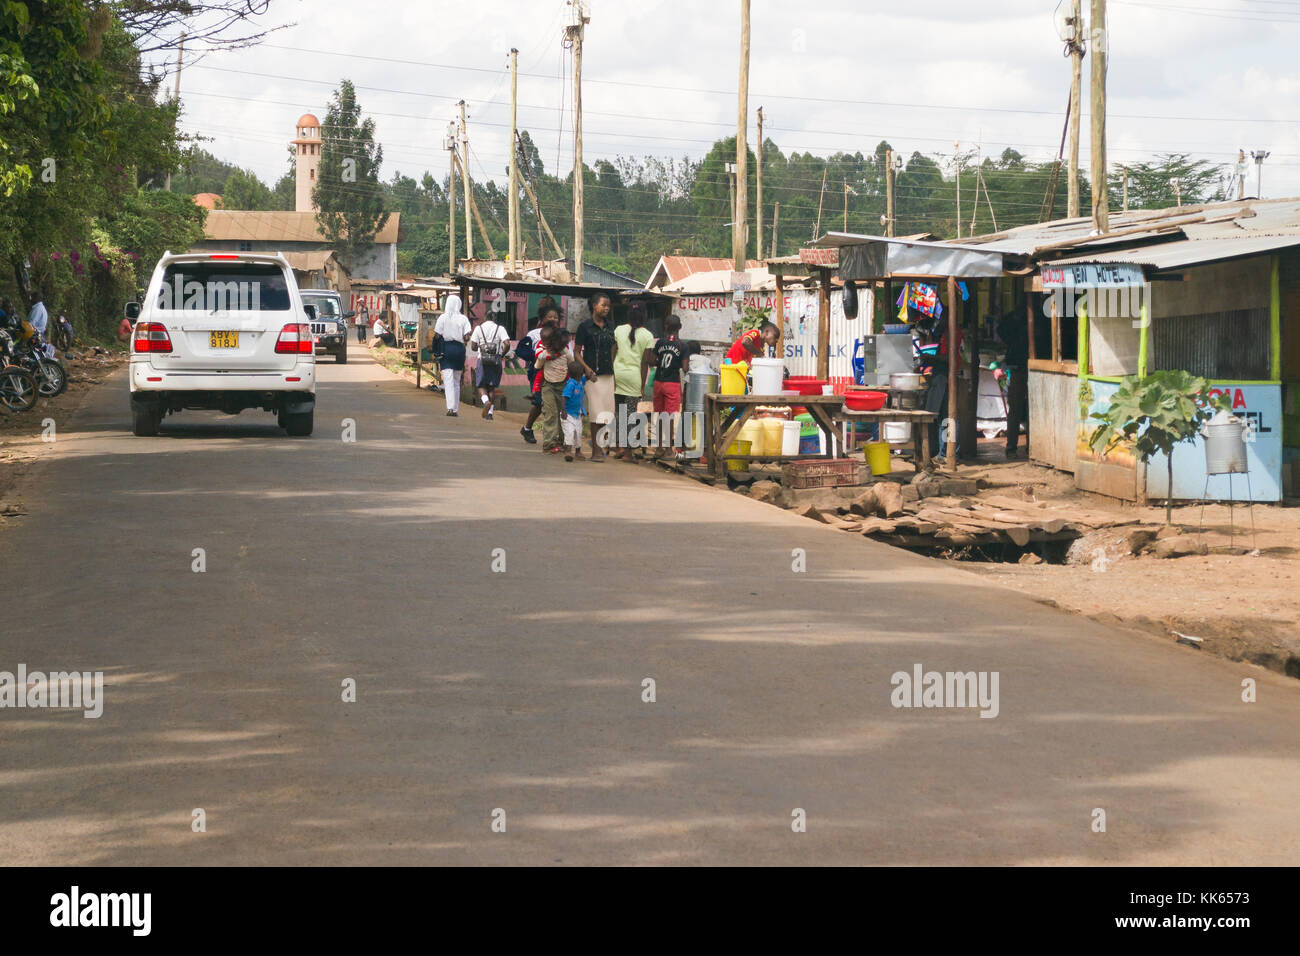 Vehicles drive along a road alongside Githogoro village slum with people going about daily life, Kenya, East Africa Stock Photo